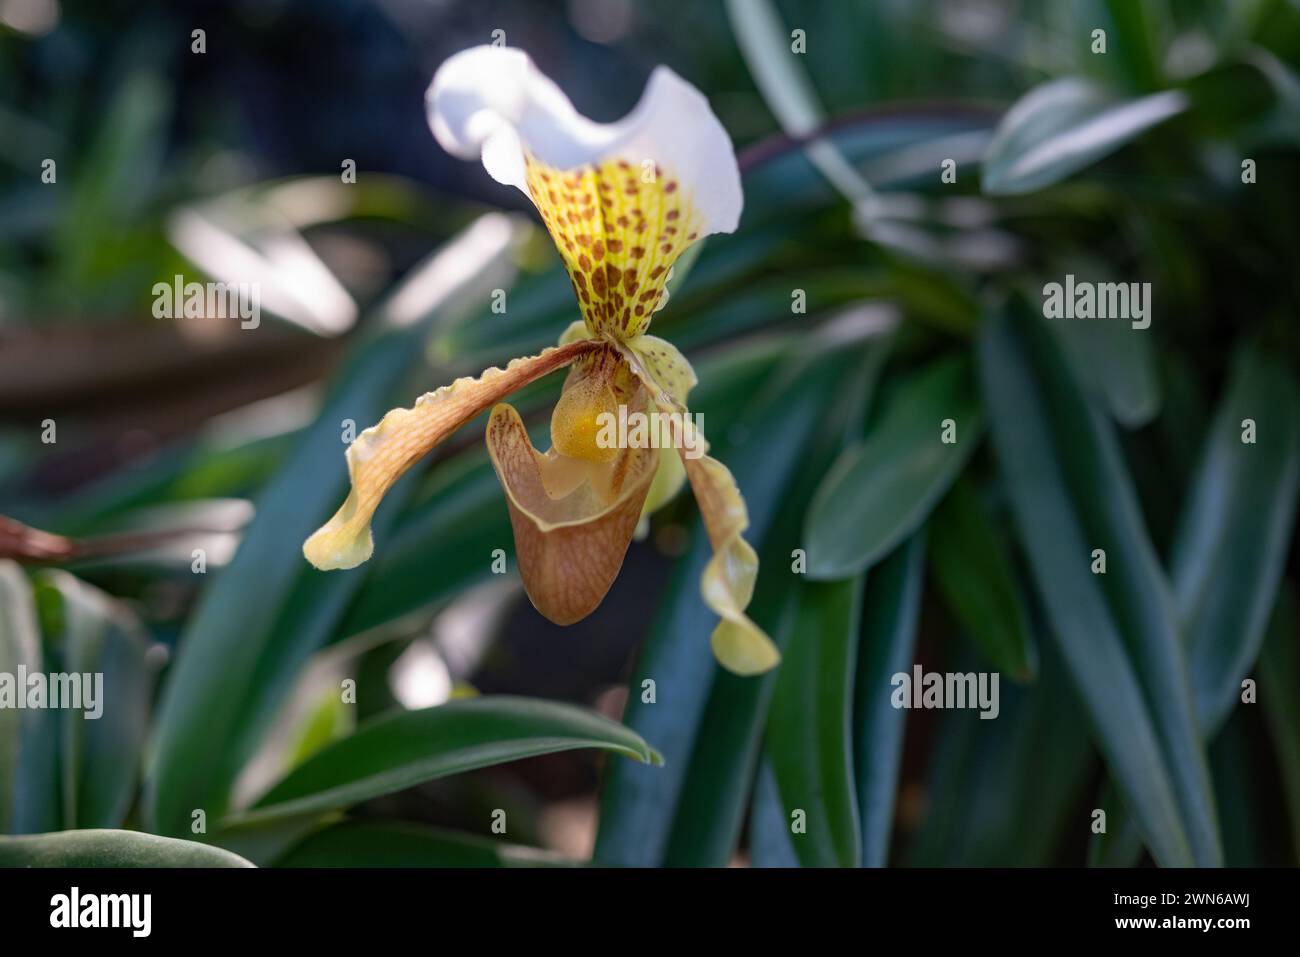 White and yellow flowers of slipper orchid on green leaves and sunlight bokeh Stock Photo